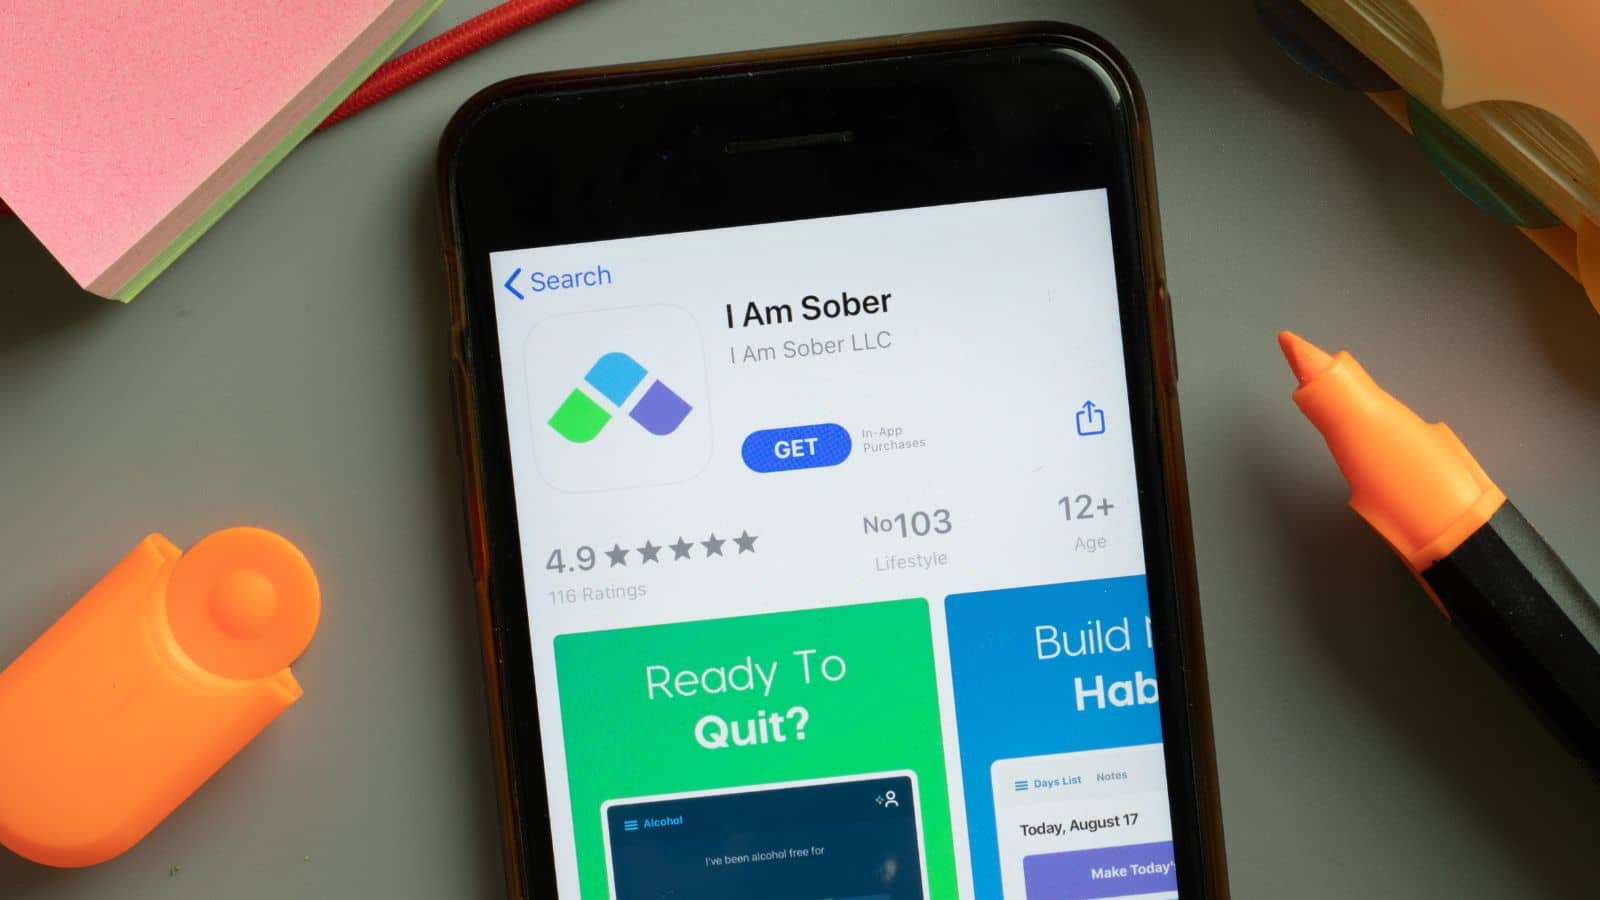 <p><a href="https://iamsober.com/en/site/home" rel="noopener external noreferrer">I Am Sober</a>helps you monitor your sobriety. It’s a motivational companion on the path to recovery from alcohol, drugs, or any other addiction. With 127M+ daily pledges made to stay sober, 30M+ Addictions set up and tracked, and 11M+ Stories shared with the community, I Am Sober is the #1 sobriety tracker.</p> <p>With the integration of I Am Sober into their journey, users can effectively track their progress in breaking bad habits and reaching new milestones, promoting a positive and sober lifestyle in the digital age of mental health management.</p>